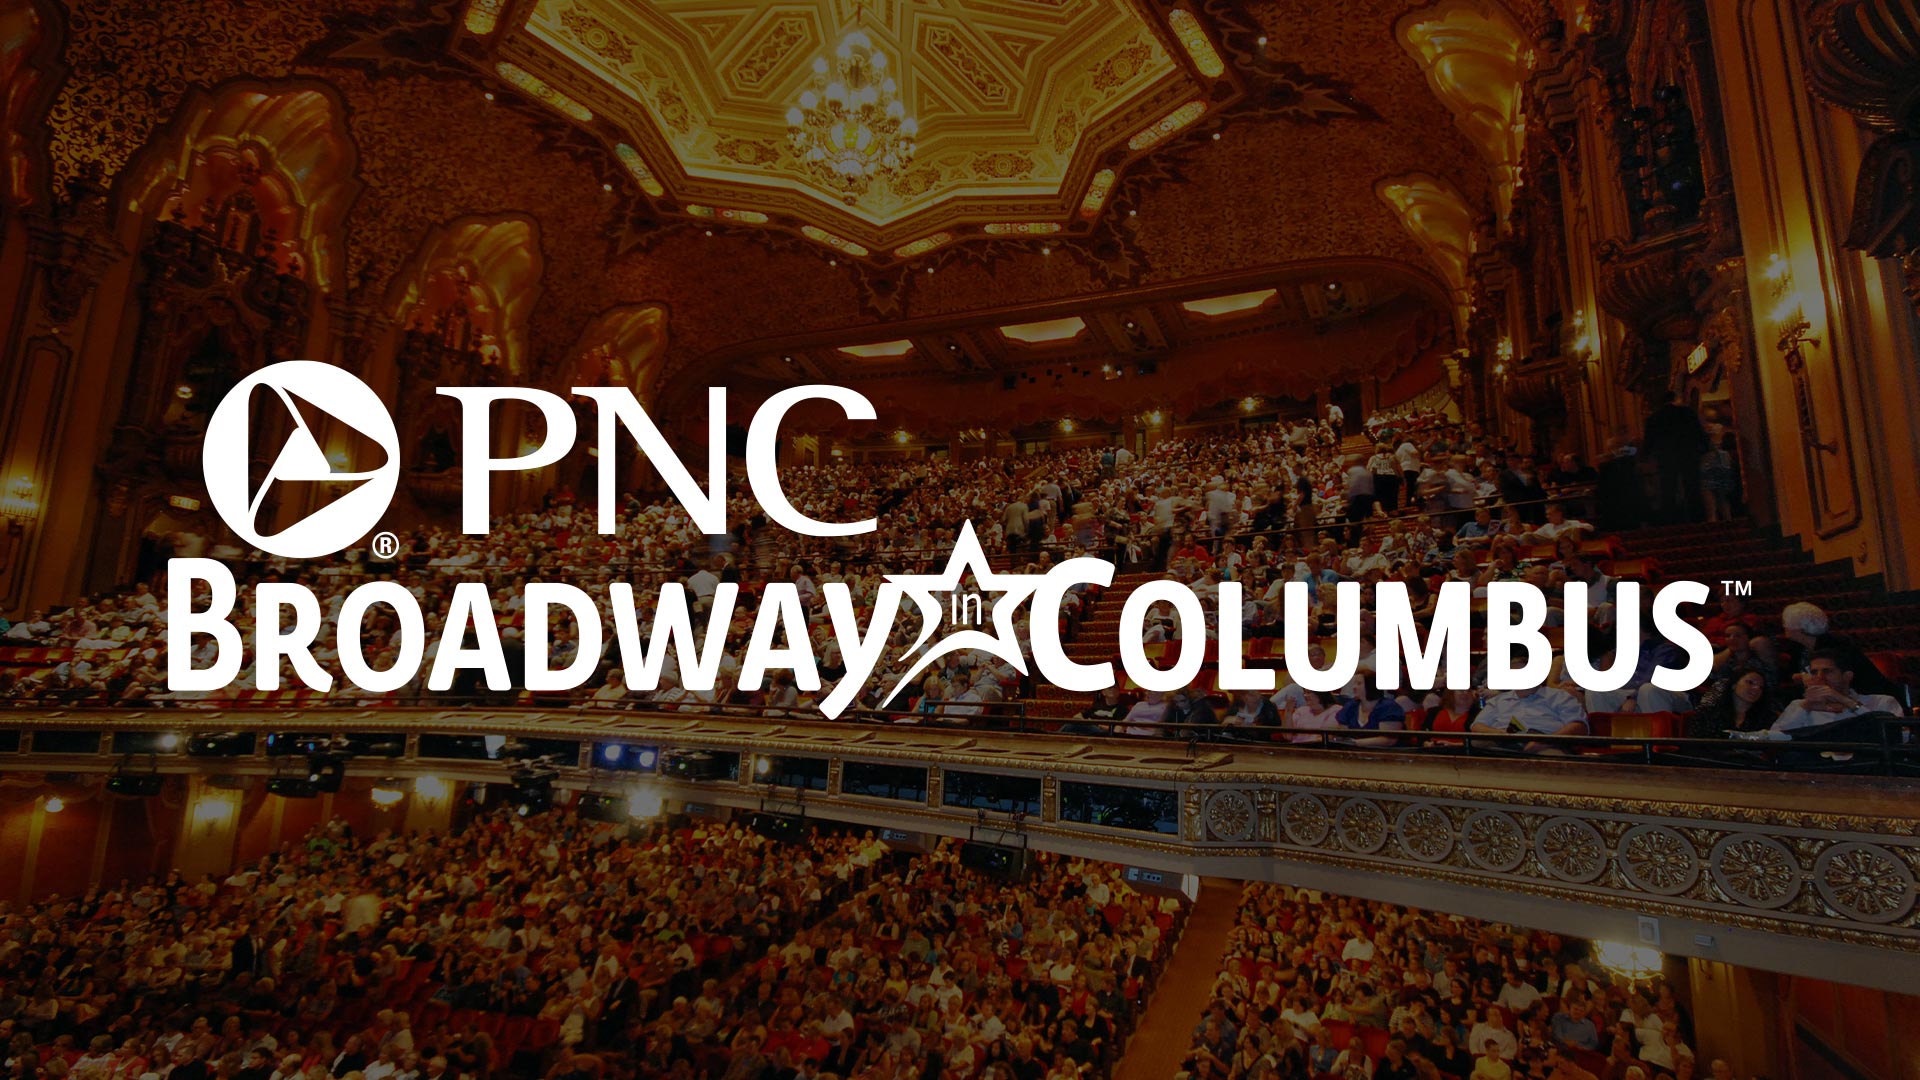 PNC Broadway in Columbus logo overlaid on a photo of the Ohio Theatre with a full audience